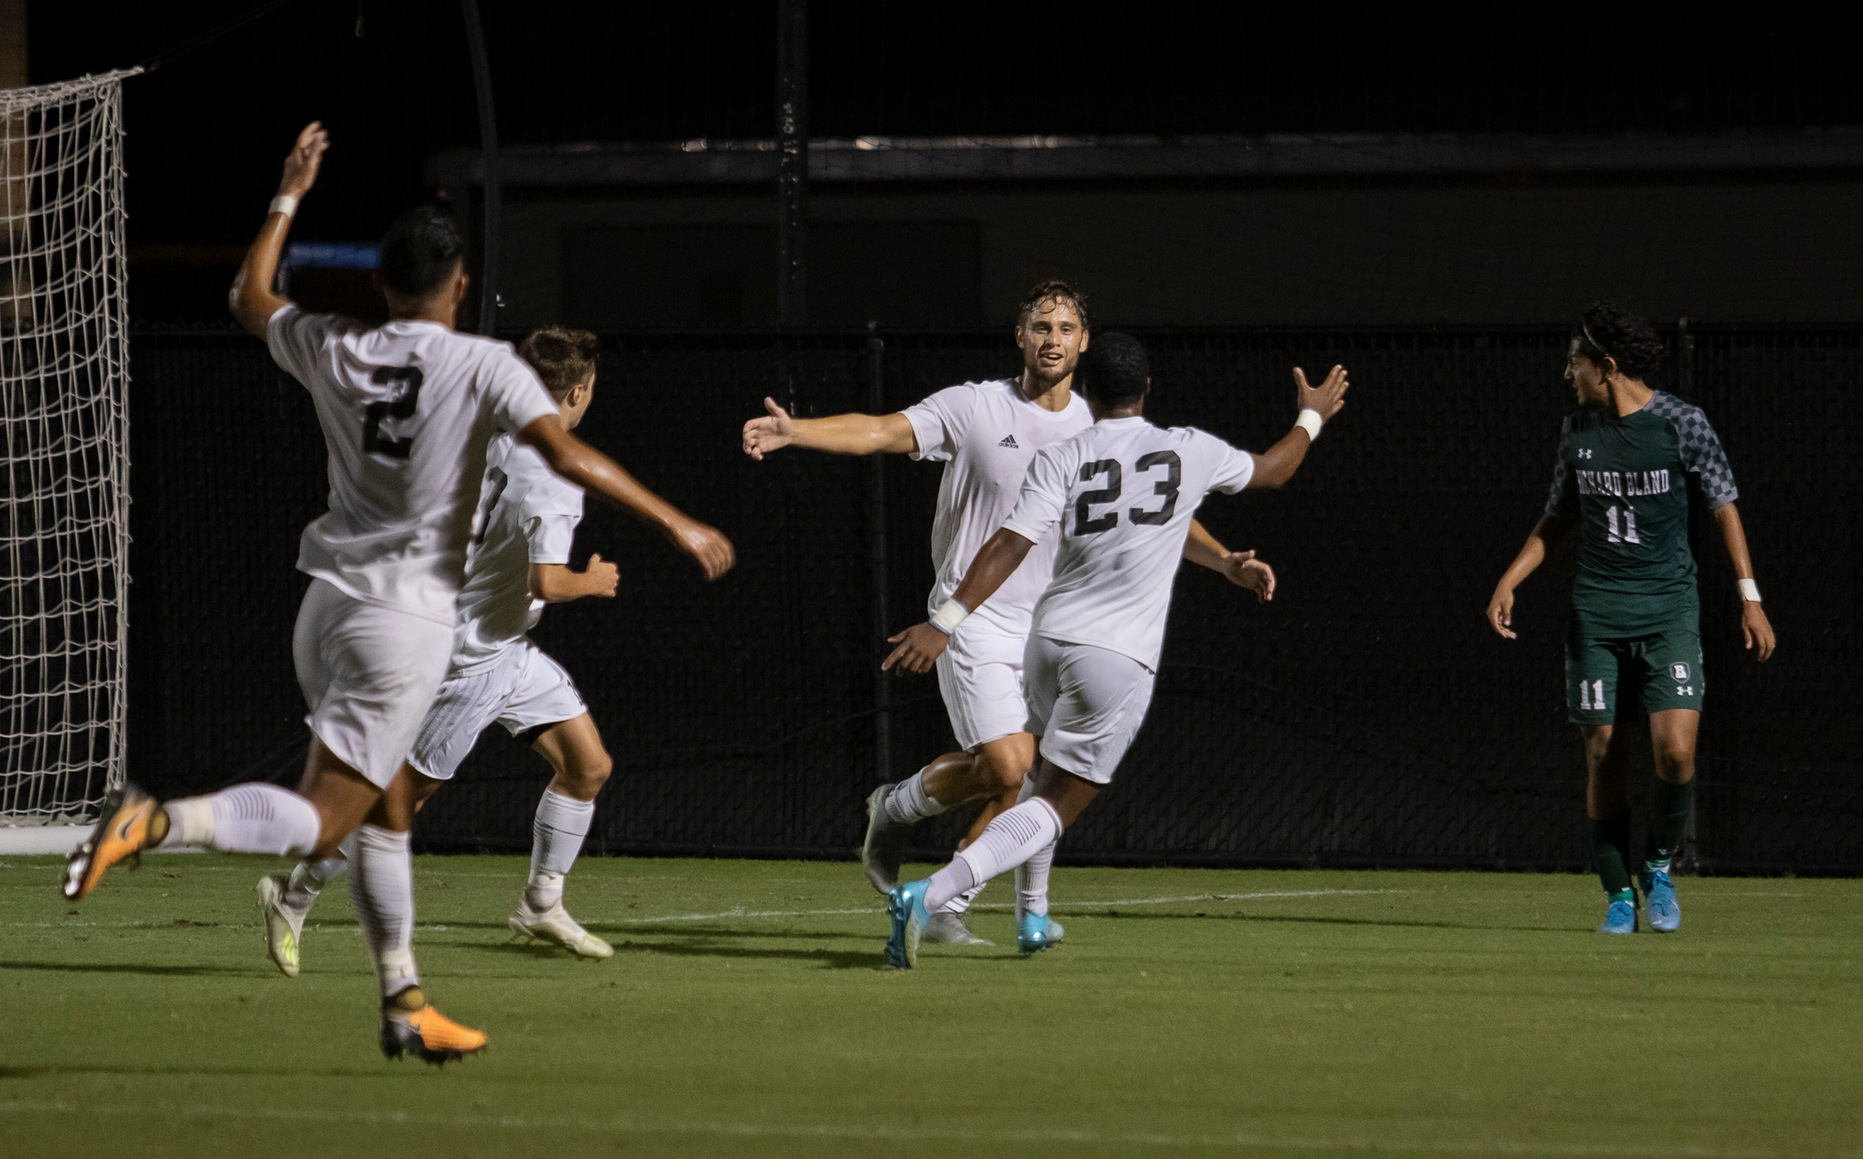 Men's soccer team plays for spot in national tournament semifinals